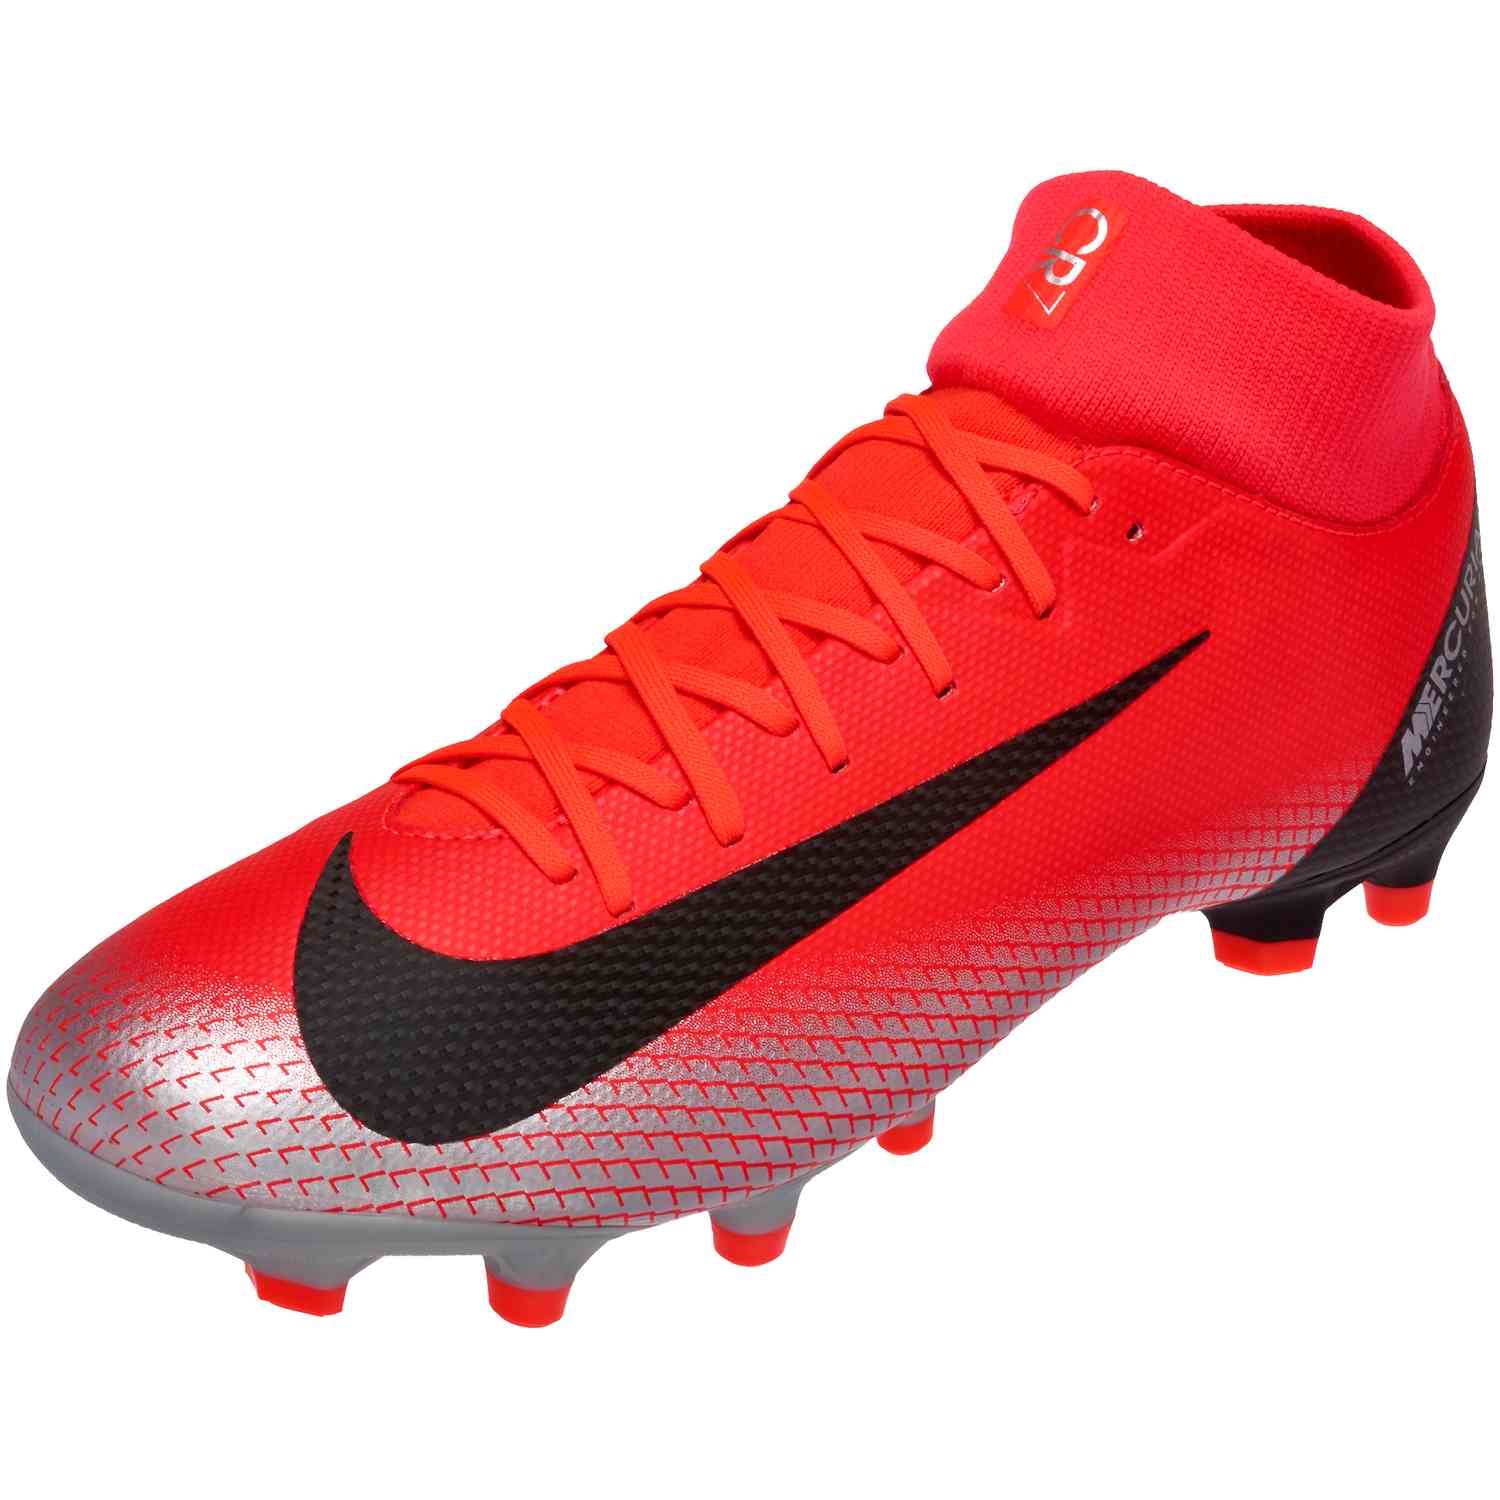 nike mercurial superfly 6 academy red off 68% -